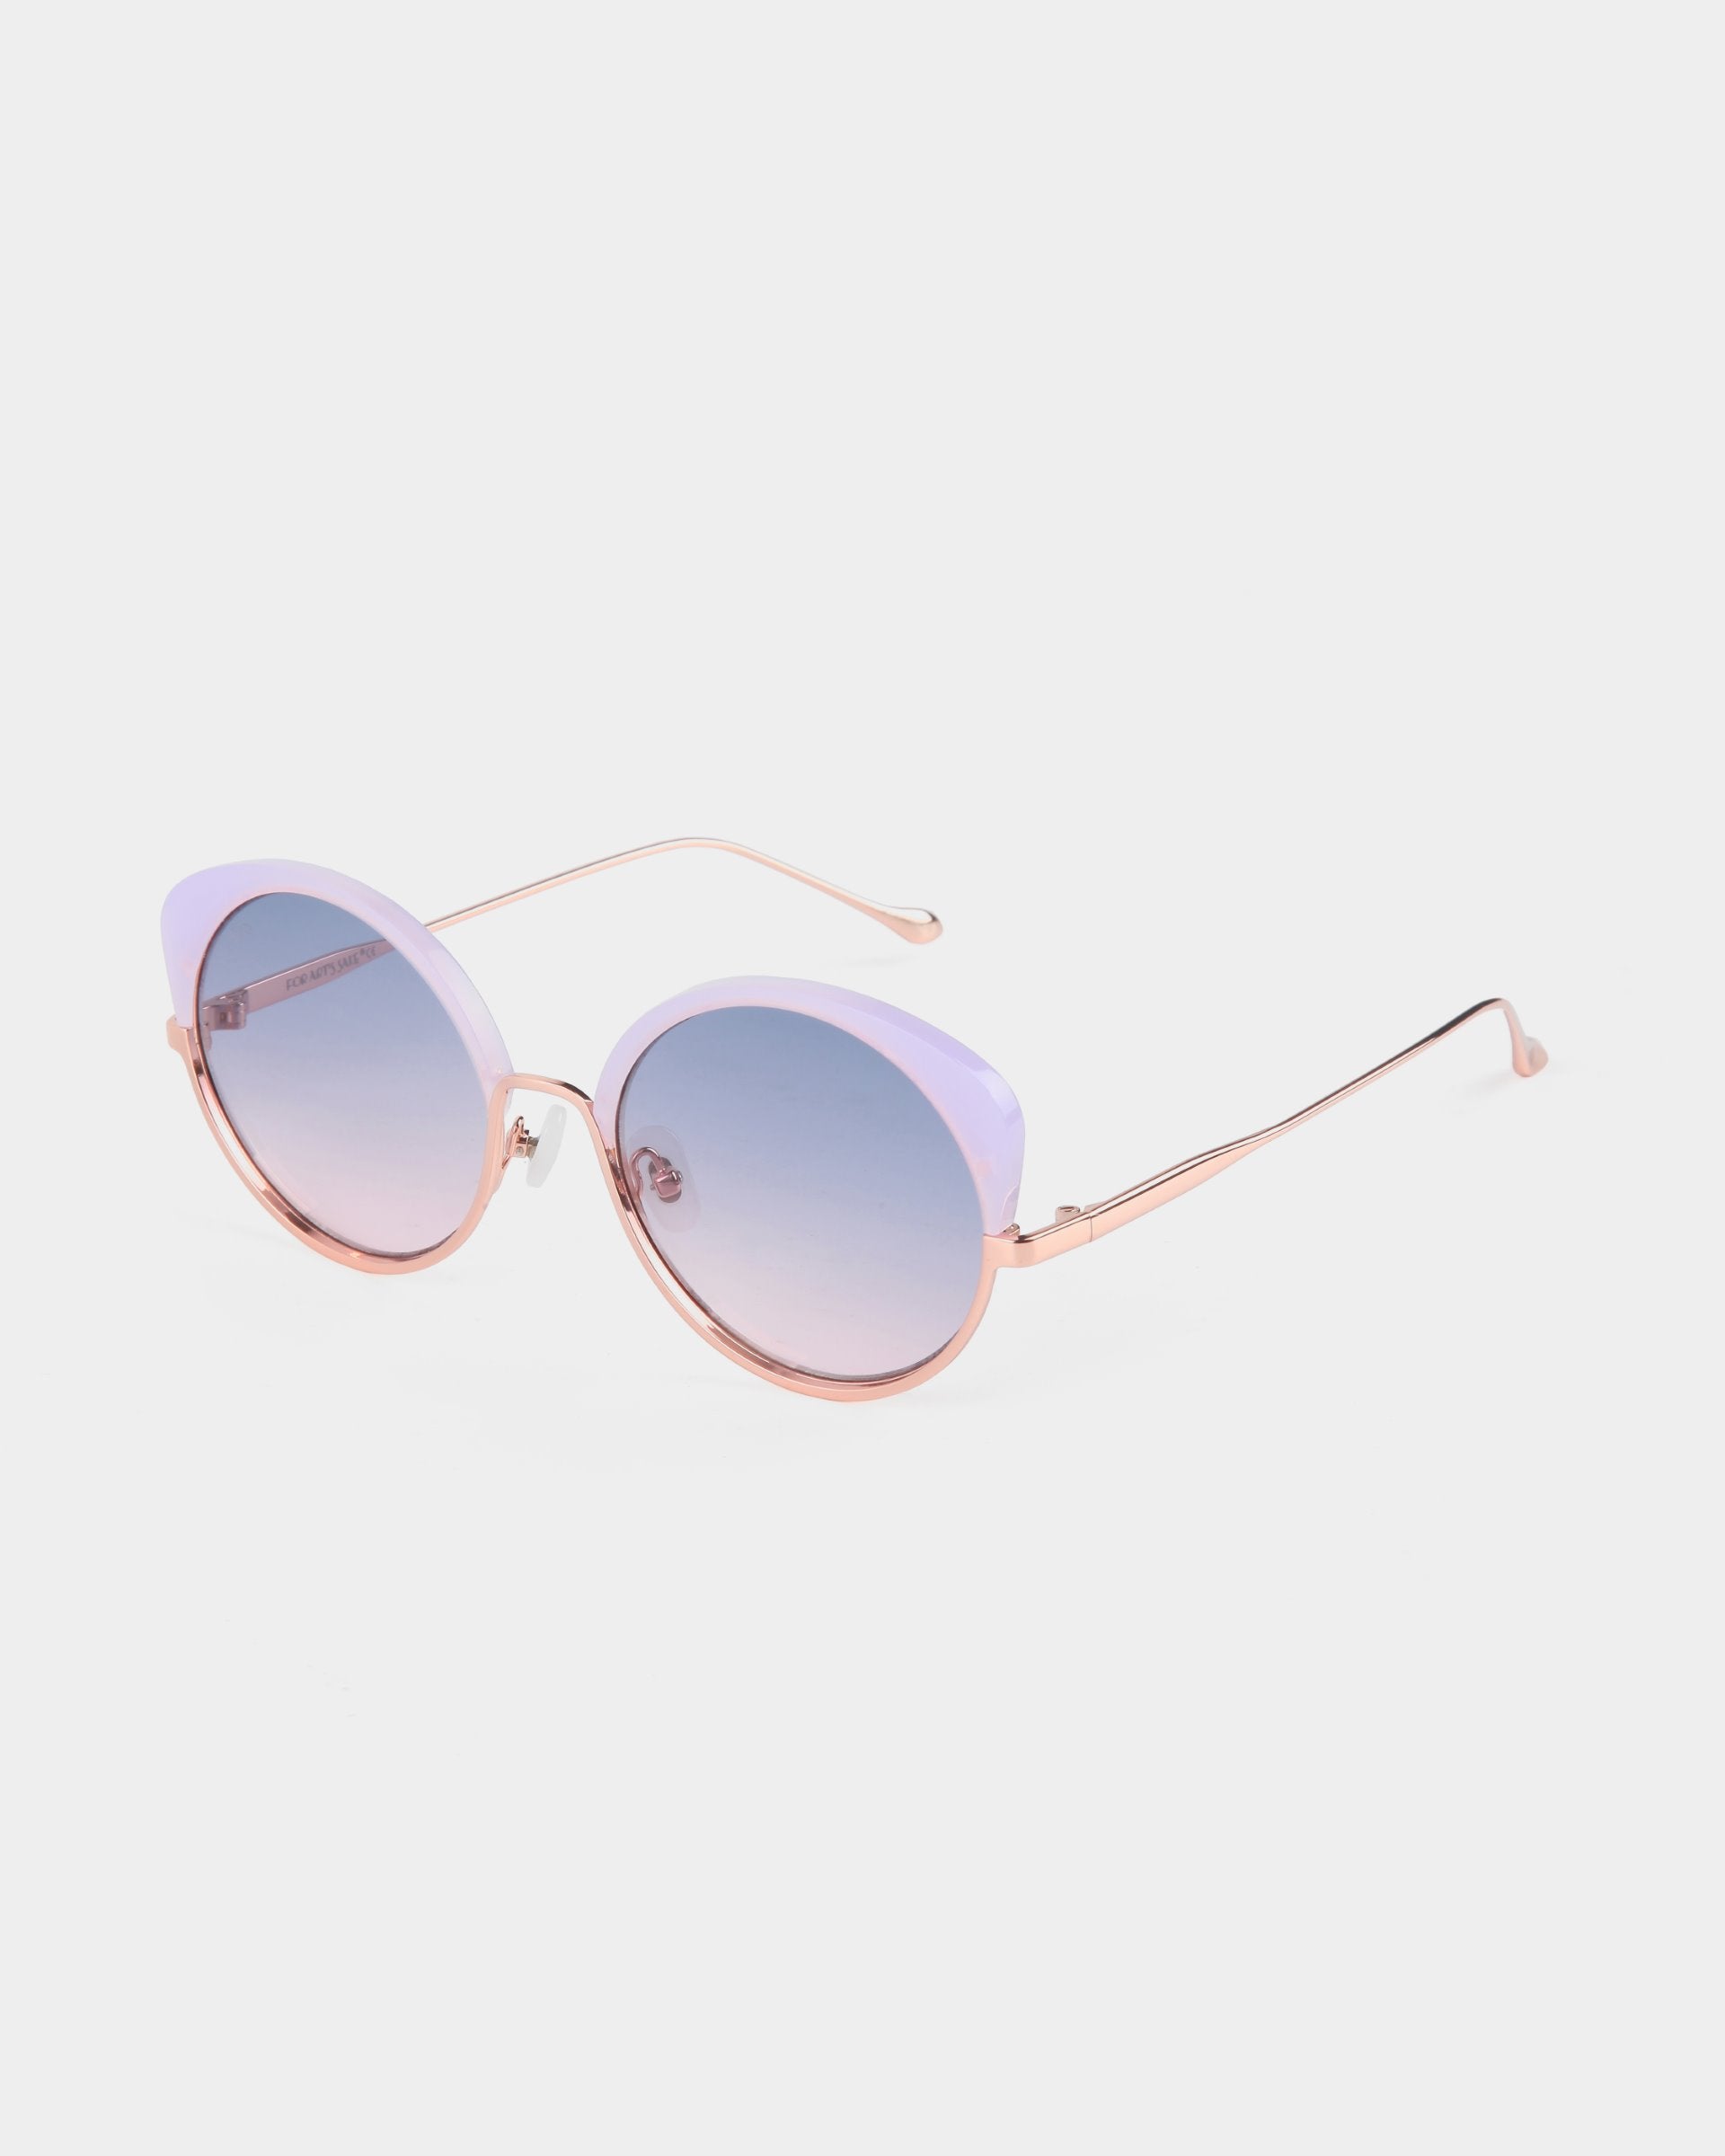 A pair of stylish, handcrafted Cocoon cat-eye sunglasses by For Art&#39;s Sake® with light purple frames and rose gold temples. The lenses are round with a gradient tint that transitions from purple to clear, offering essential UV protection. The Cocoon sunglasses by For Art&#39;s Sake® rest elegantly on a white surface.